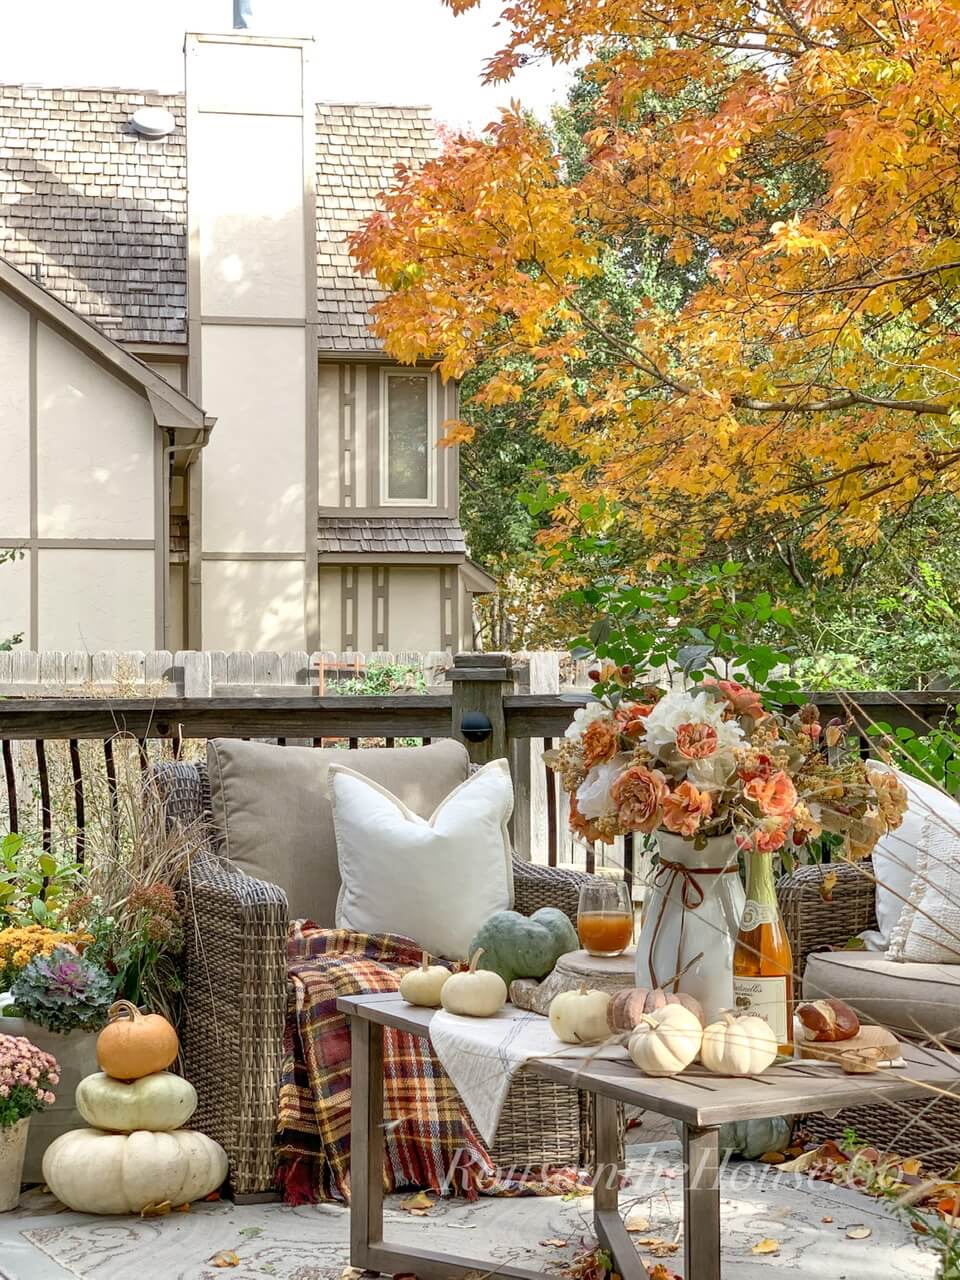 Cozy fall deck decor: including a fall planter, a pumpkin stack, fall table decor, lots of pillows and throws.